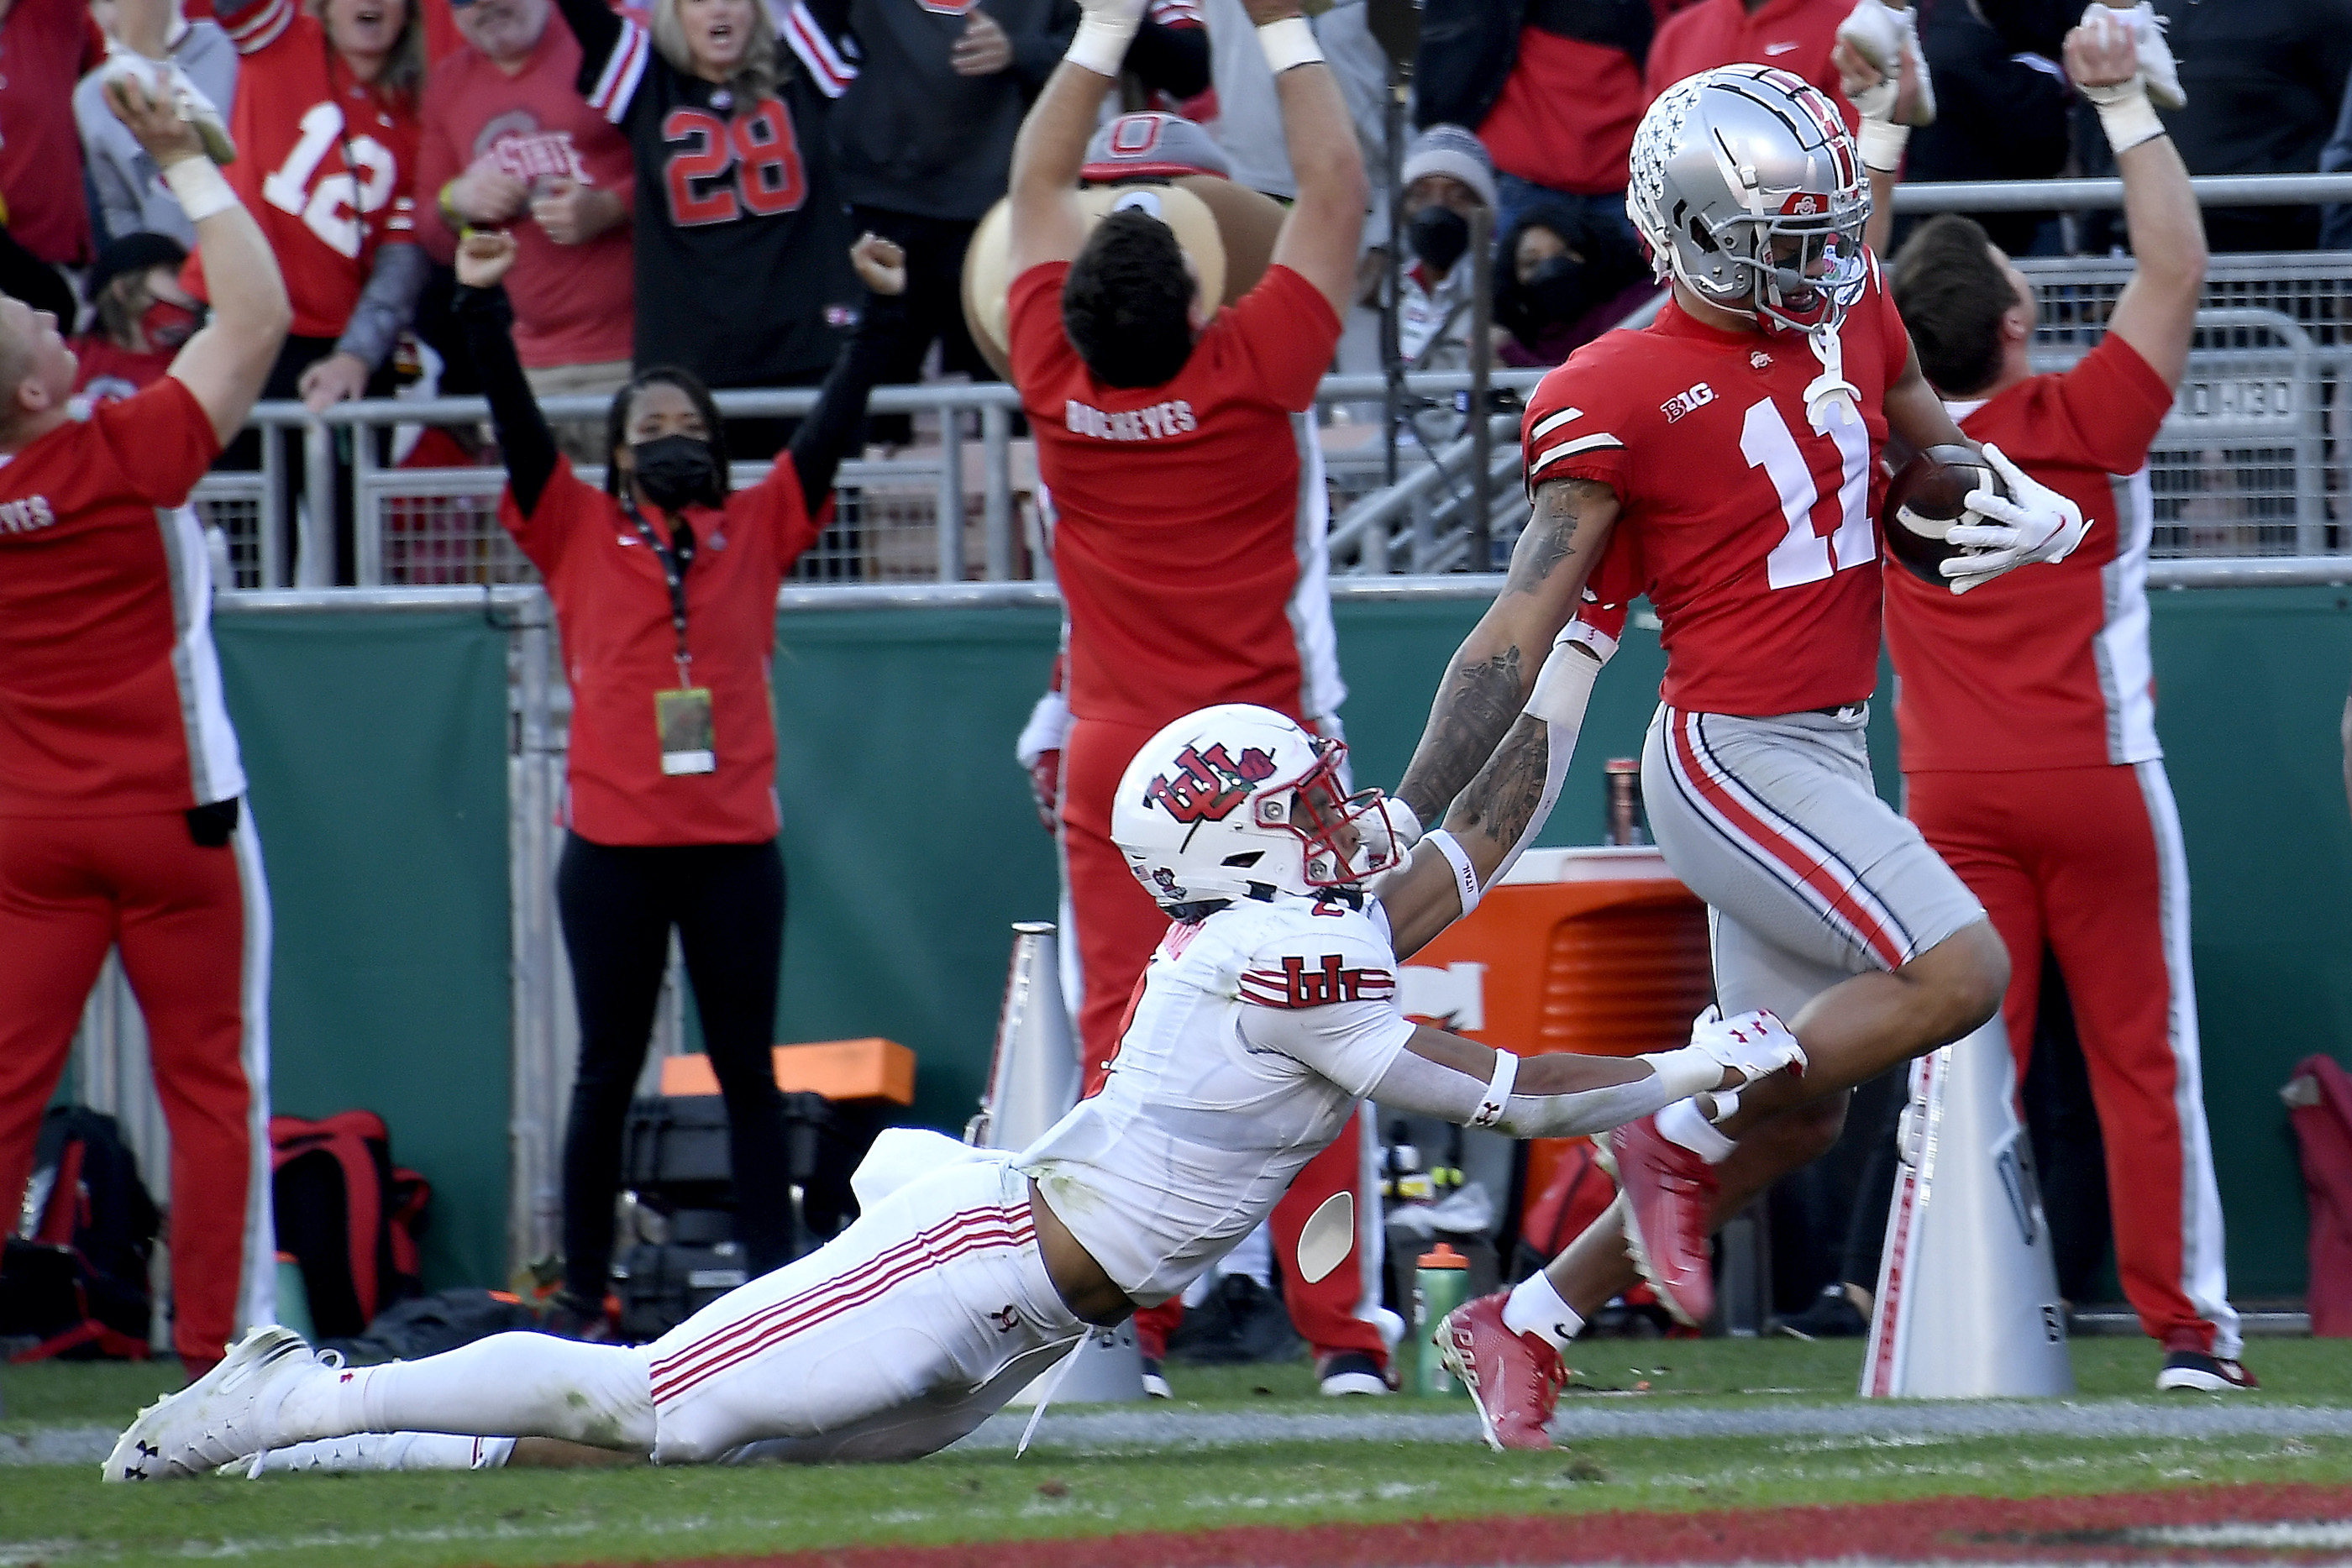 Jaxon Smith-Njigba #11 of the Ohio State Buckeyes scores a touchdown against the Utah Utes during the second quarter in the Rose Bowl Game at Rose Bowl Stadium on January 01, 2022 in Pasadena, California.